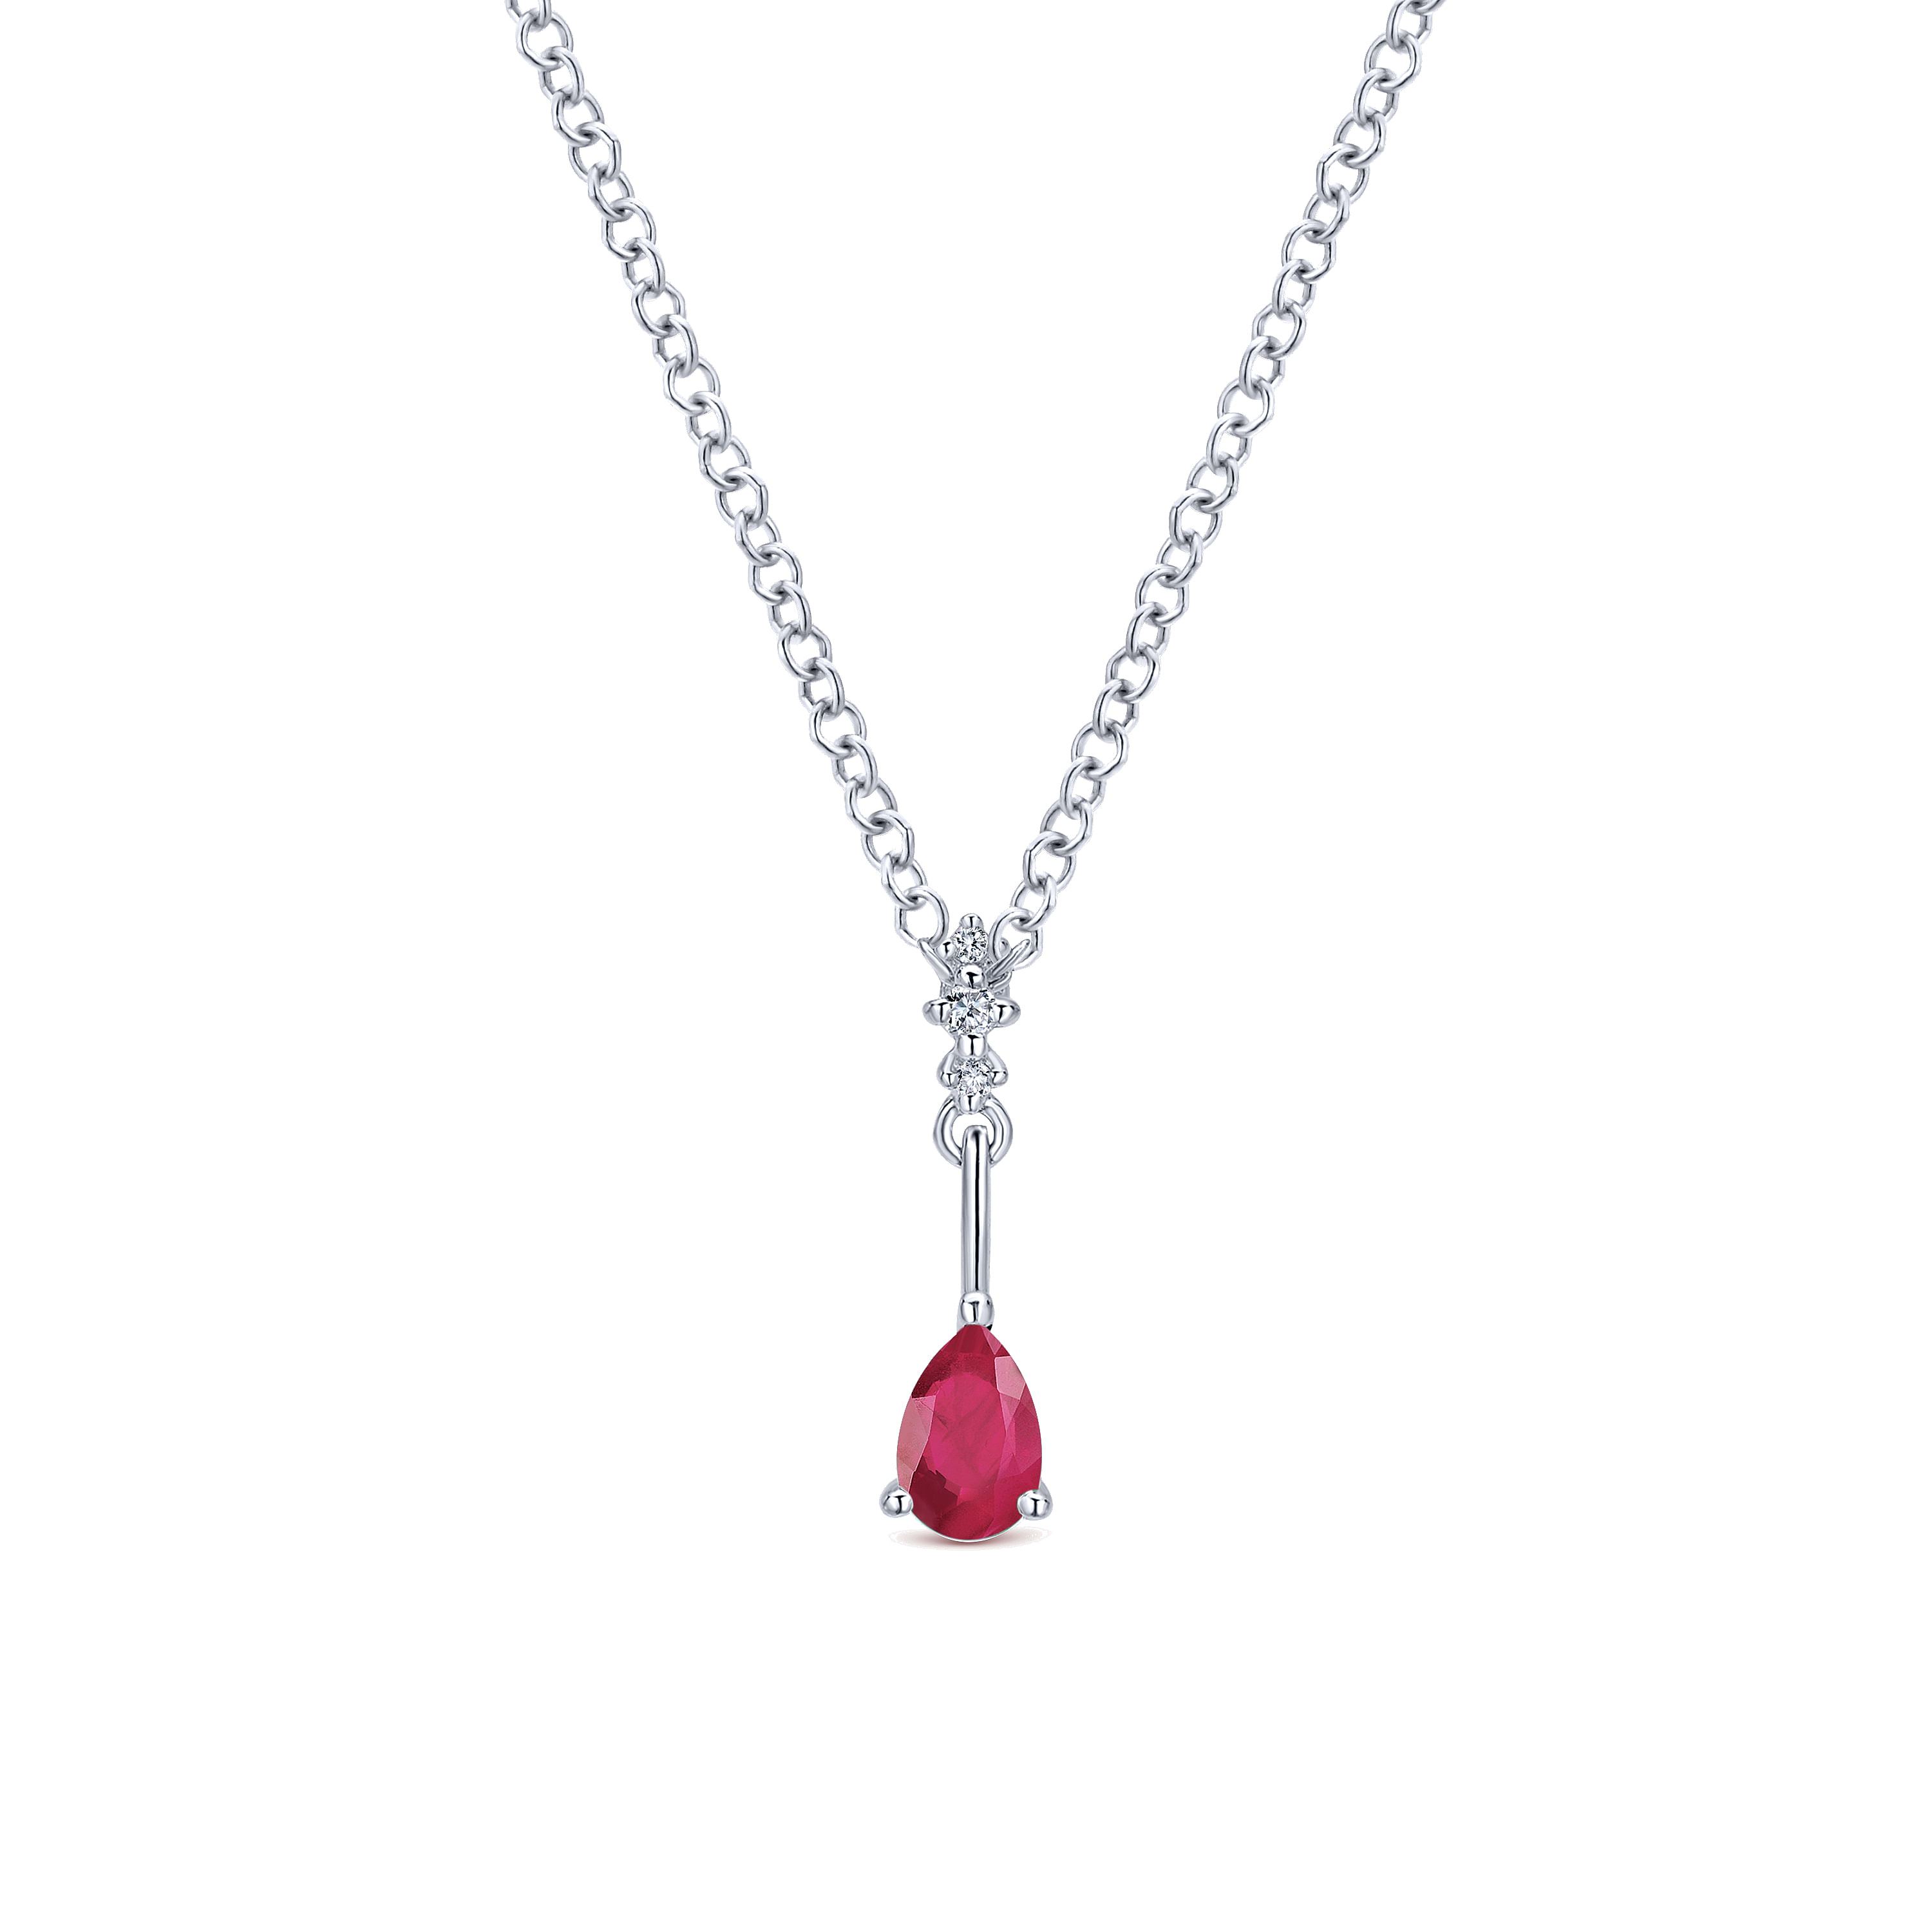 14K White Gold Pear Shaped Ruby and Diamond Drop Pendant Necklace